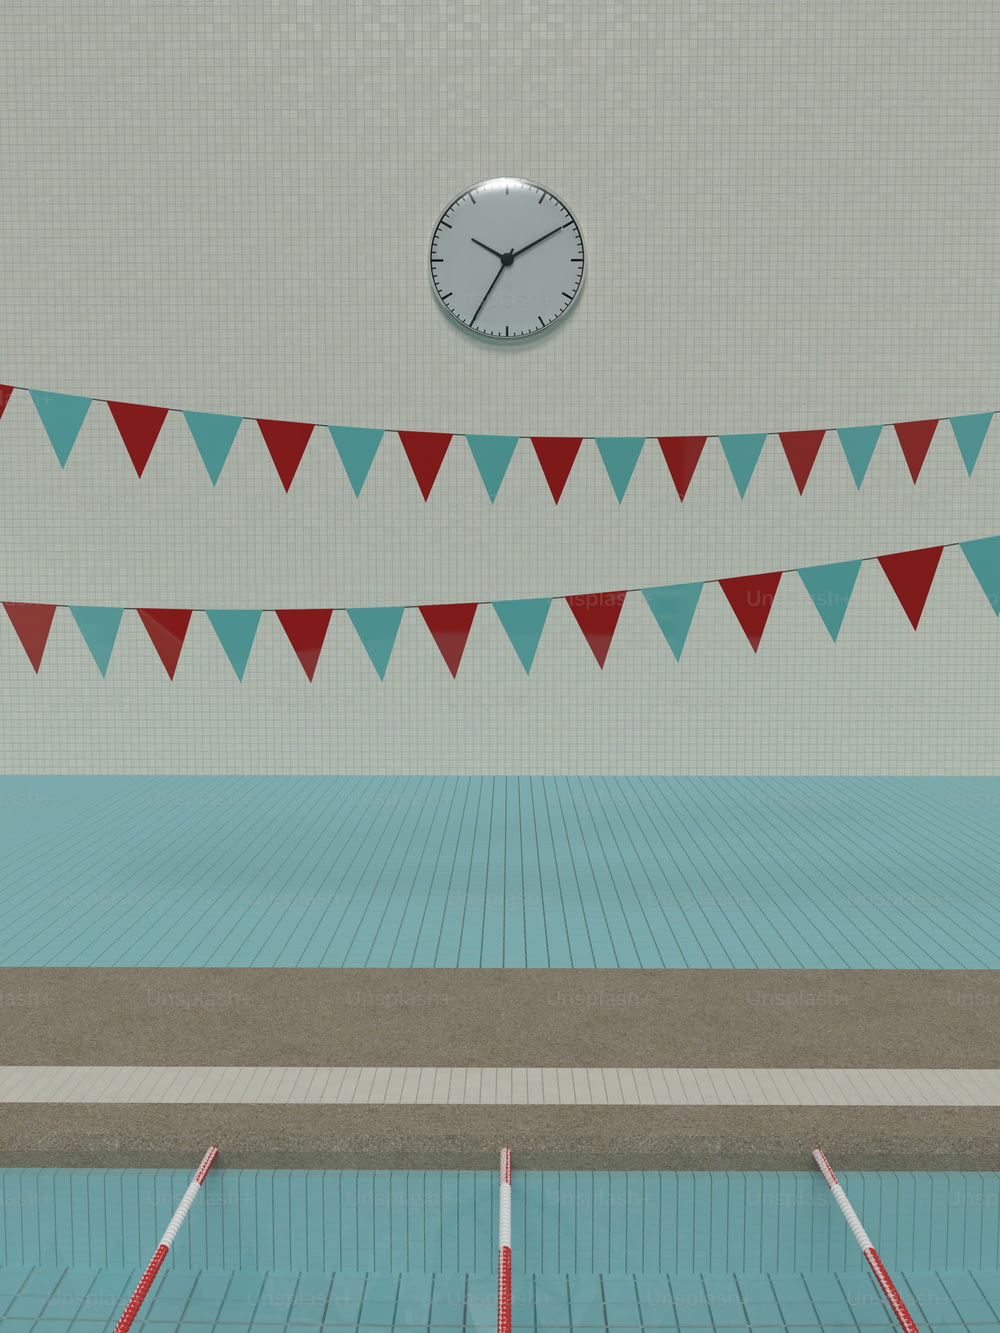 a swimming pool with a clock on the wall